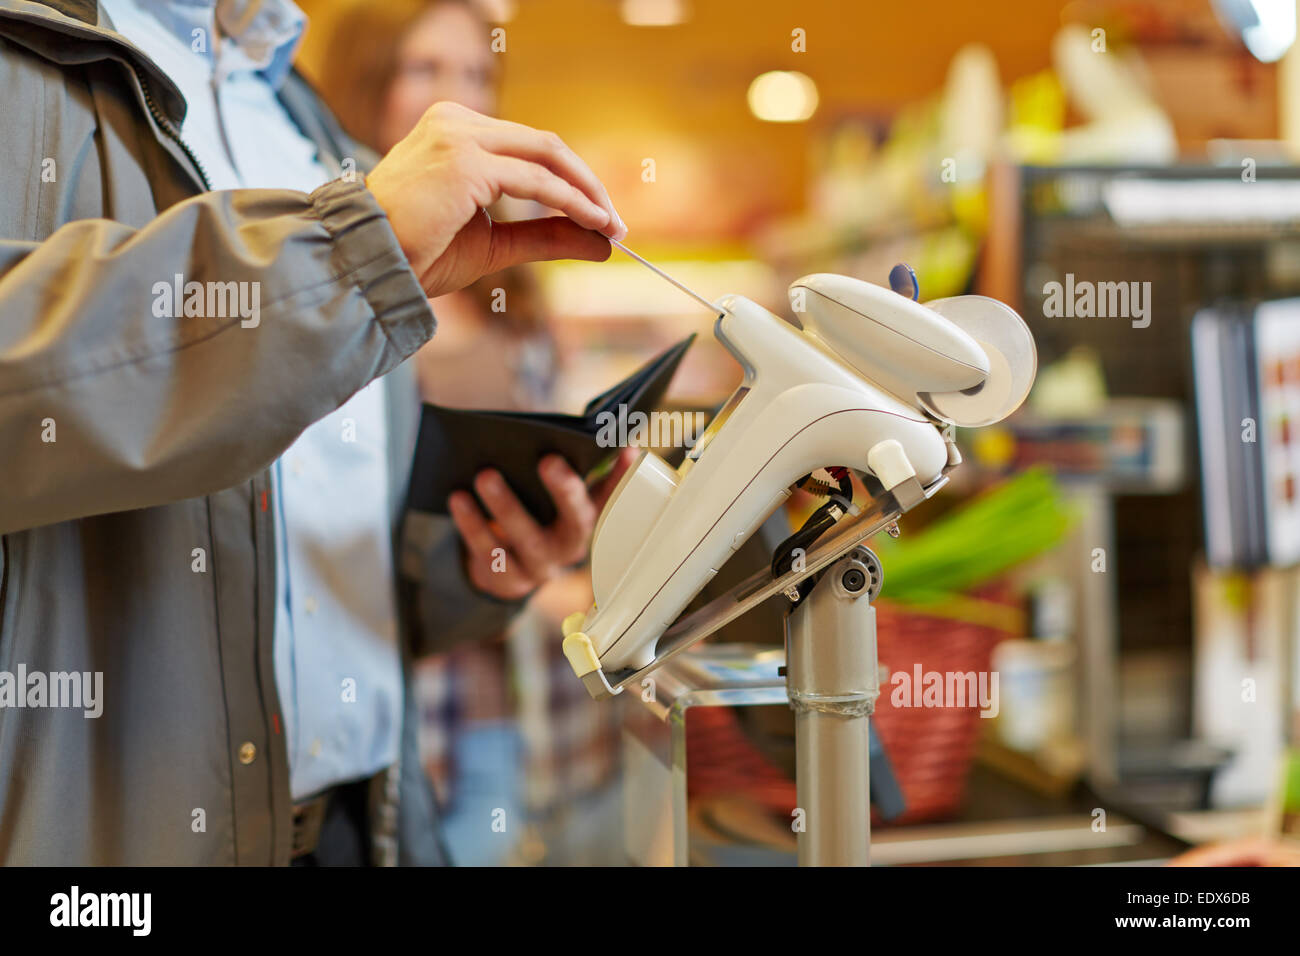 Man paying with credit card at supermarket checkout Stock Photo